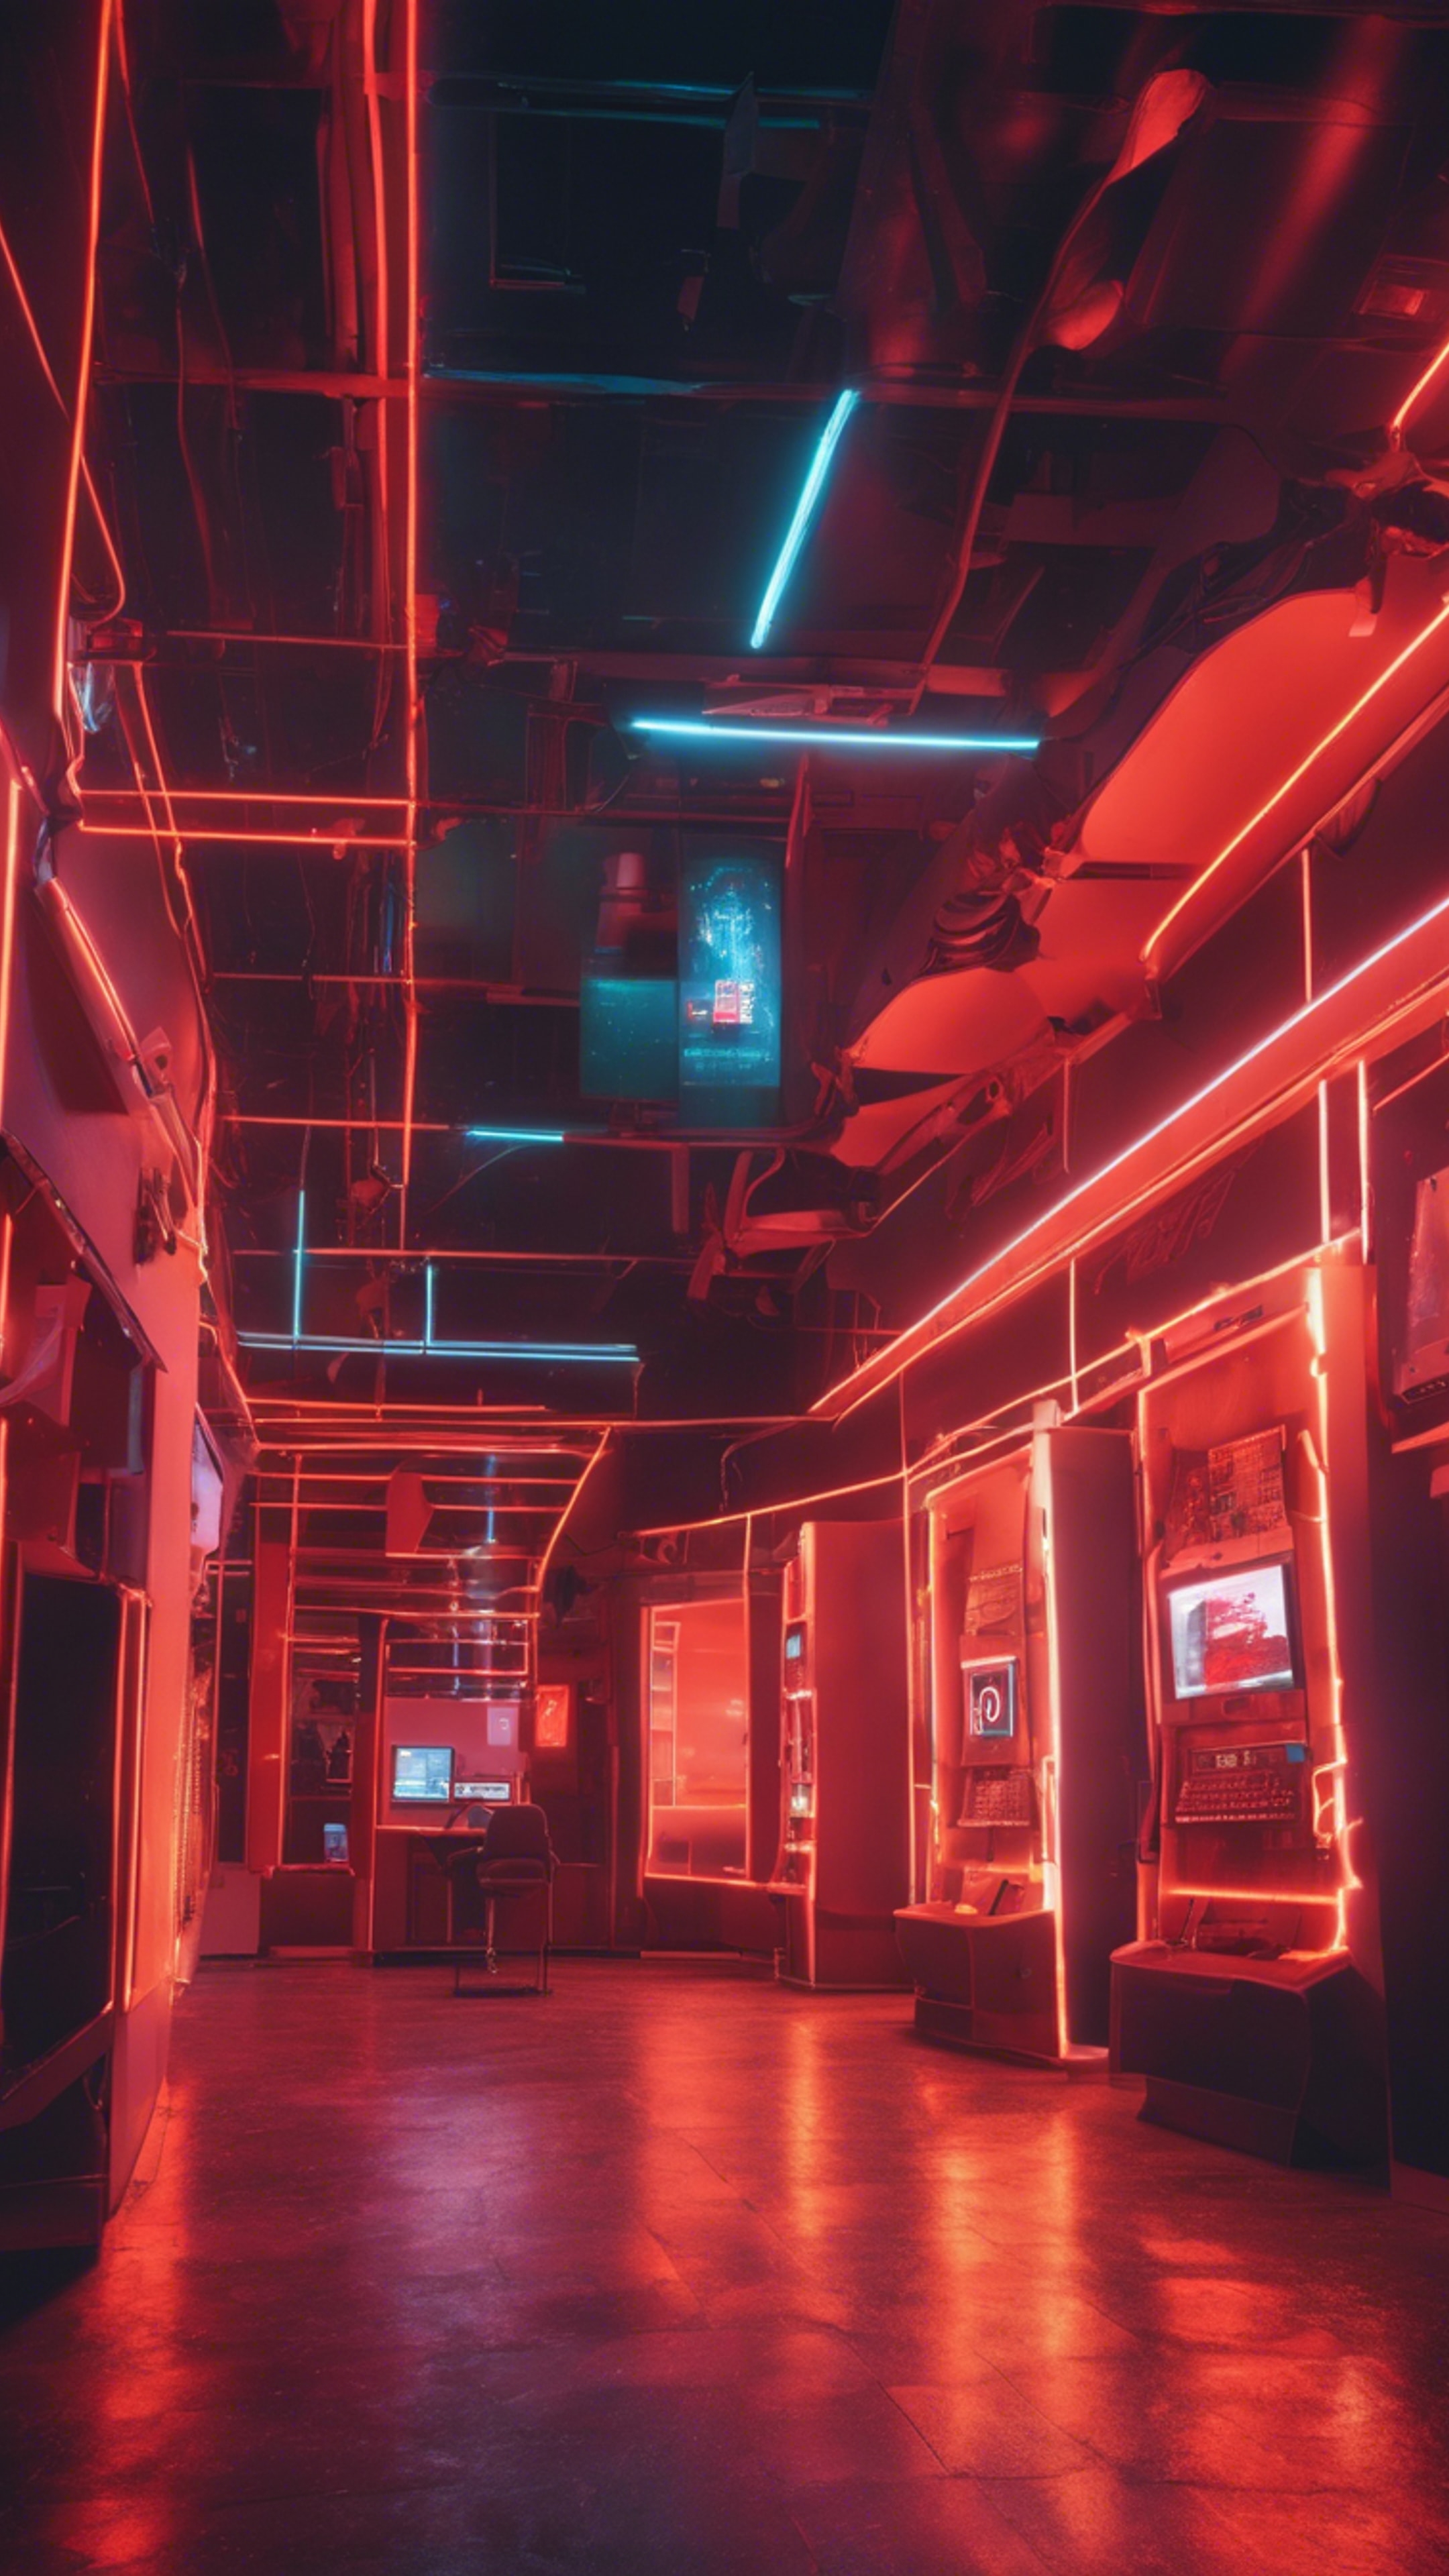 An architecturally unique cyber cafe glowing with neon red and orange lights at night. Tapeta na zeď[37c23e18da0f466d9ff8]